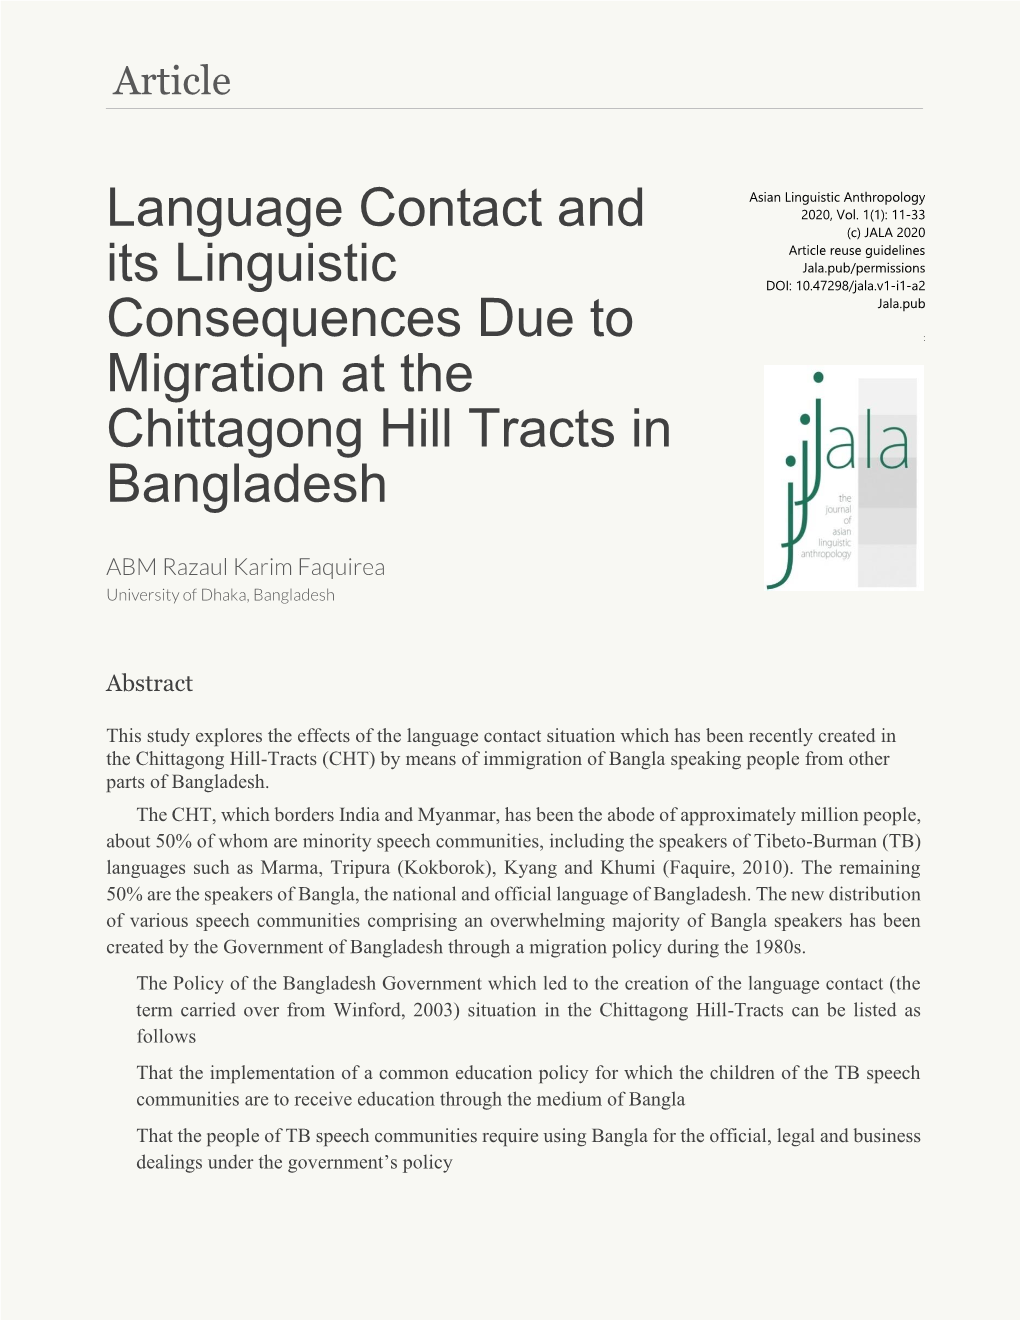 Language Contact and Its Linguistic Consequences Due to Migration at the Chittagong Hill Tracts in Bangladesh